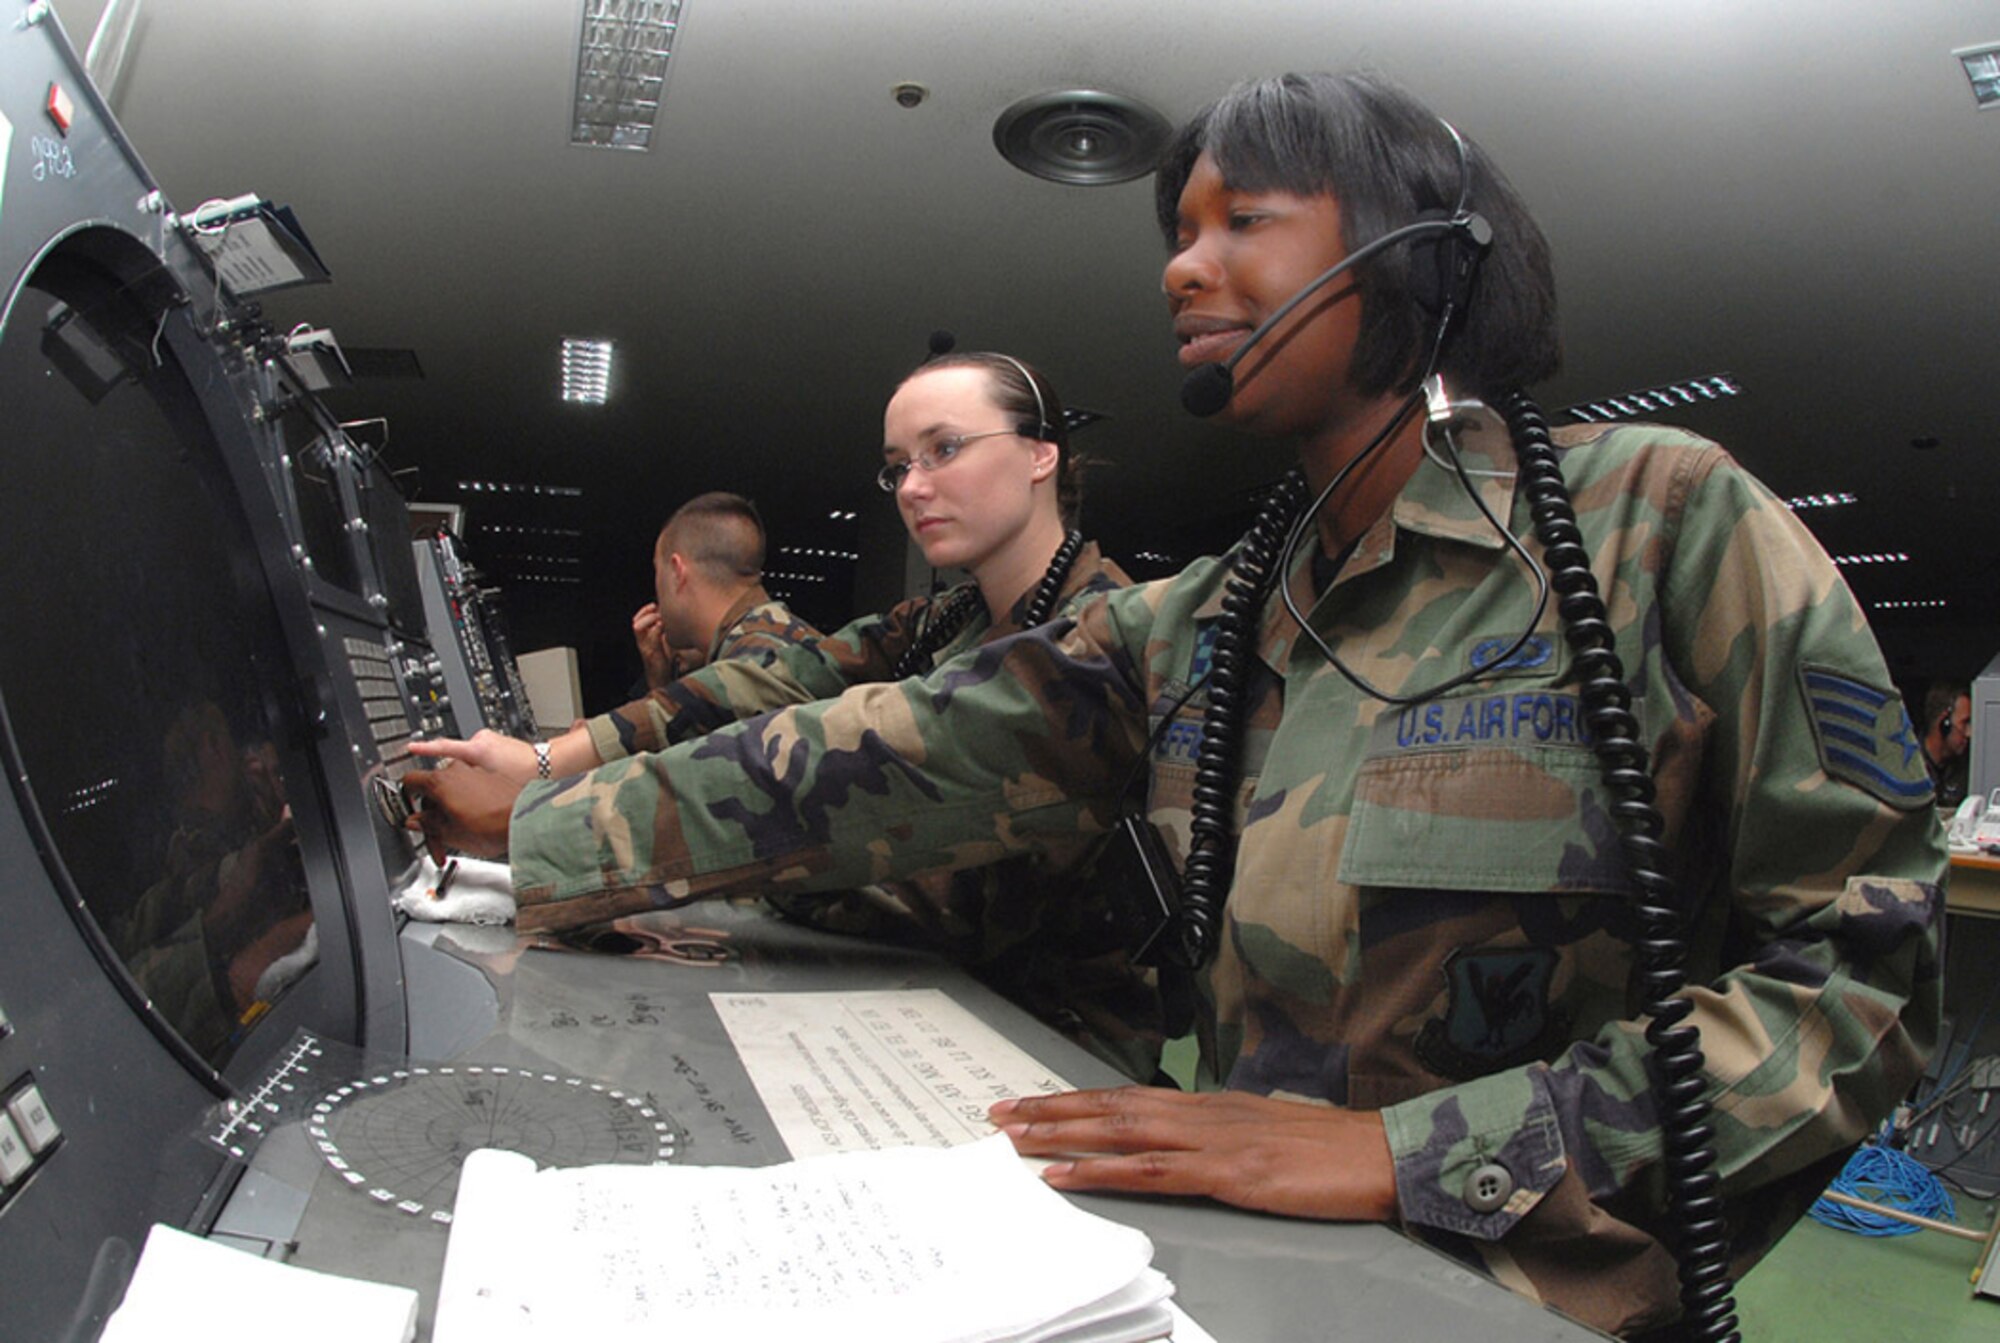 Staff Sgt. Crystal Sheffield (right) and Airman 1st Class Amber Hoedebeck control a mission by using a Base Air Defense Ground Environment system at Naha Air Base, Japan. They are weapons directors with the 623rd Air Control Flight. (U.S. Air Force photo/Staff Sgt. Steven Nabor)